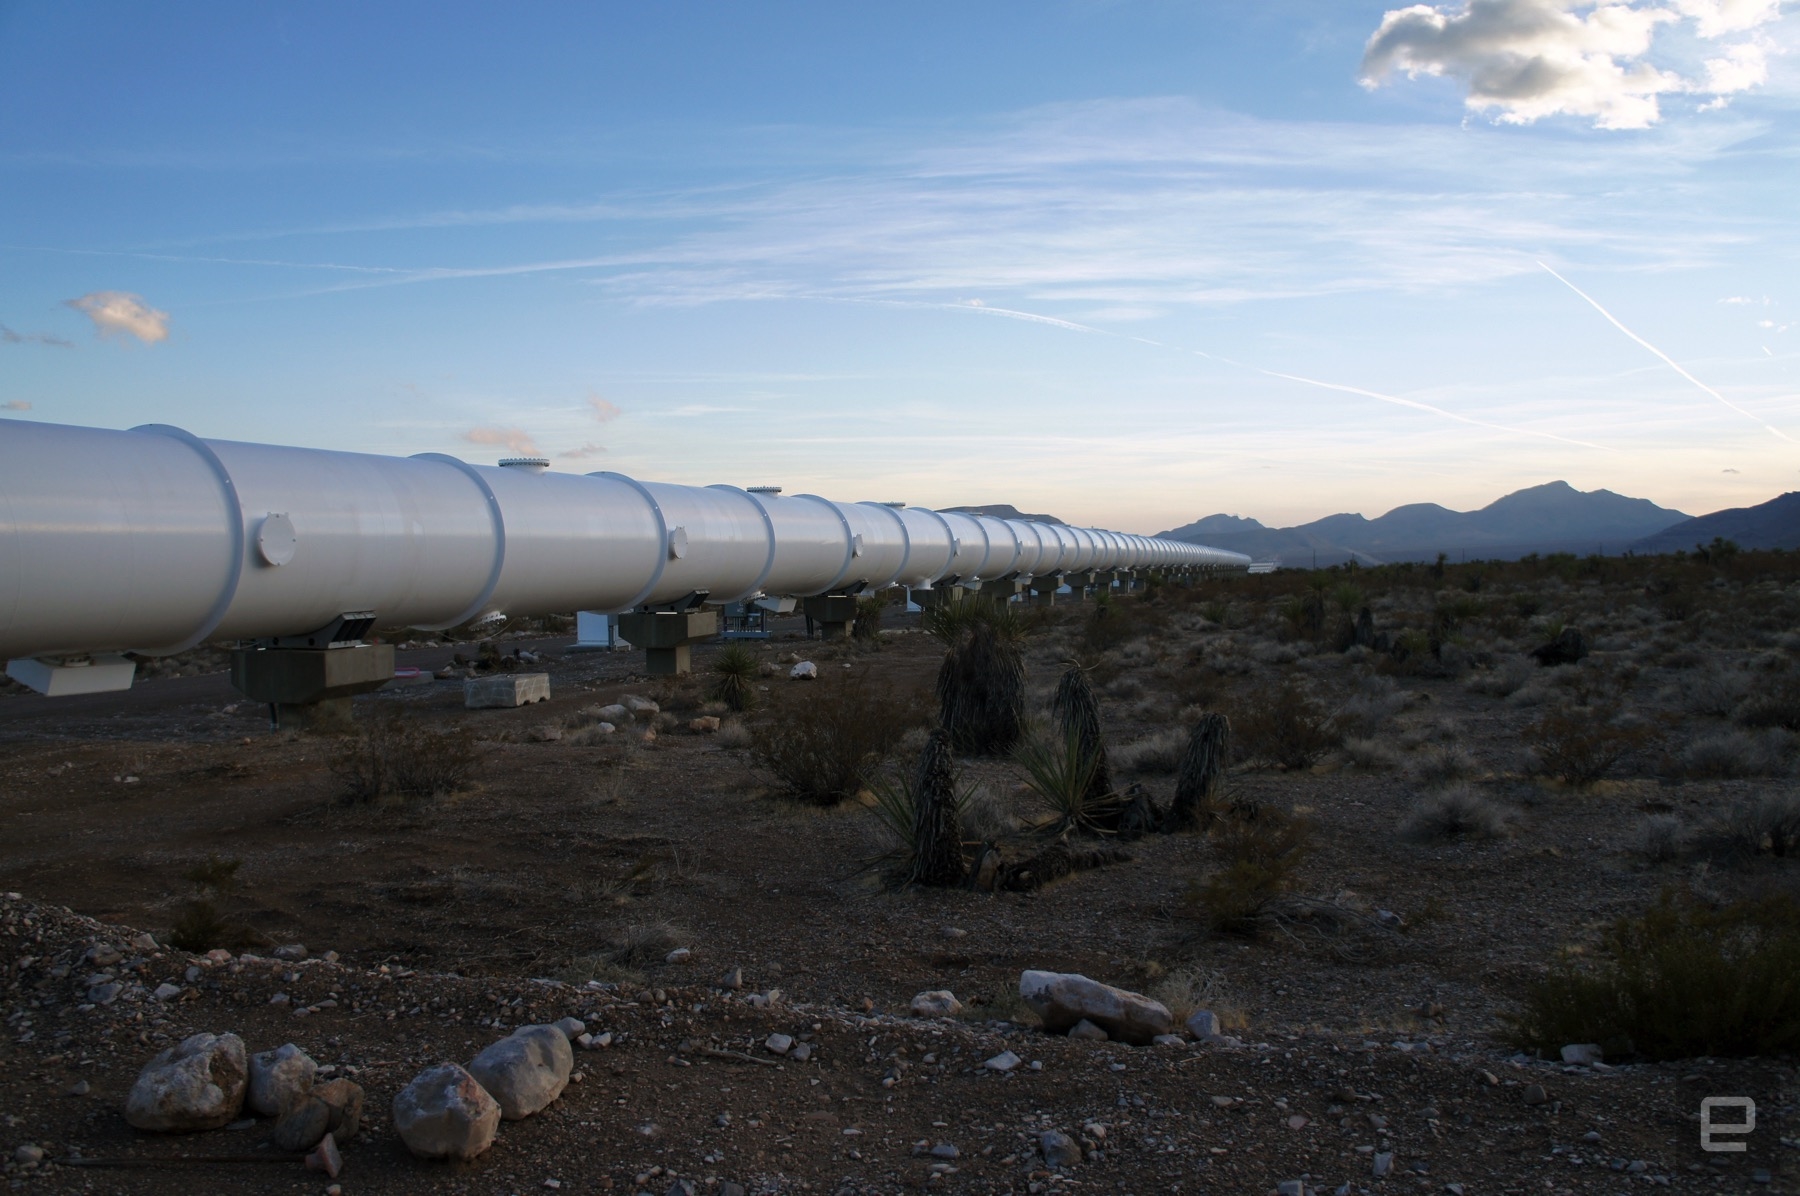 Touring Hyperloop One's ever-evolving test site | DeviceDaily.com